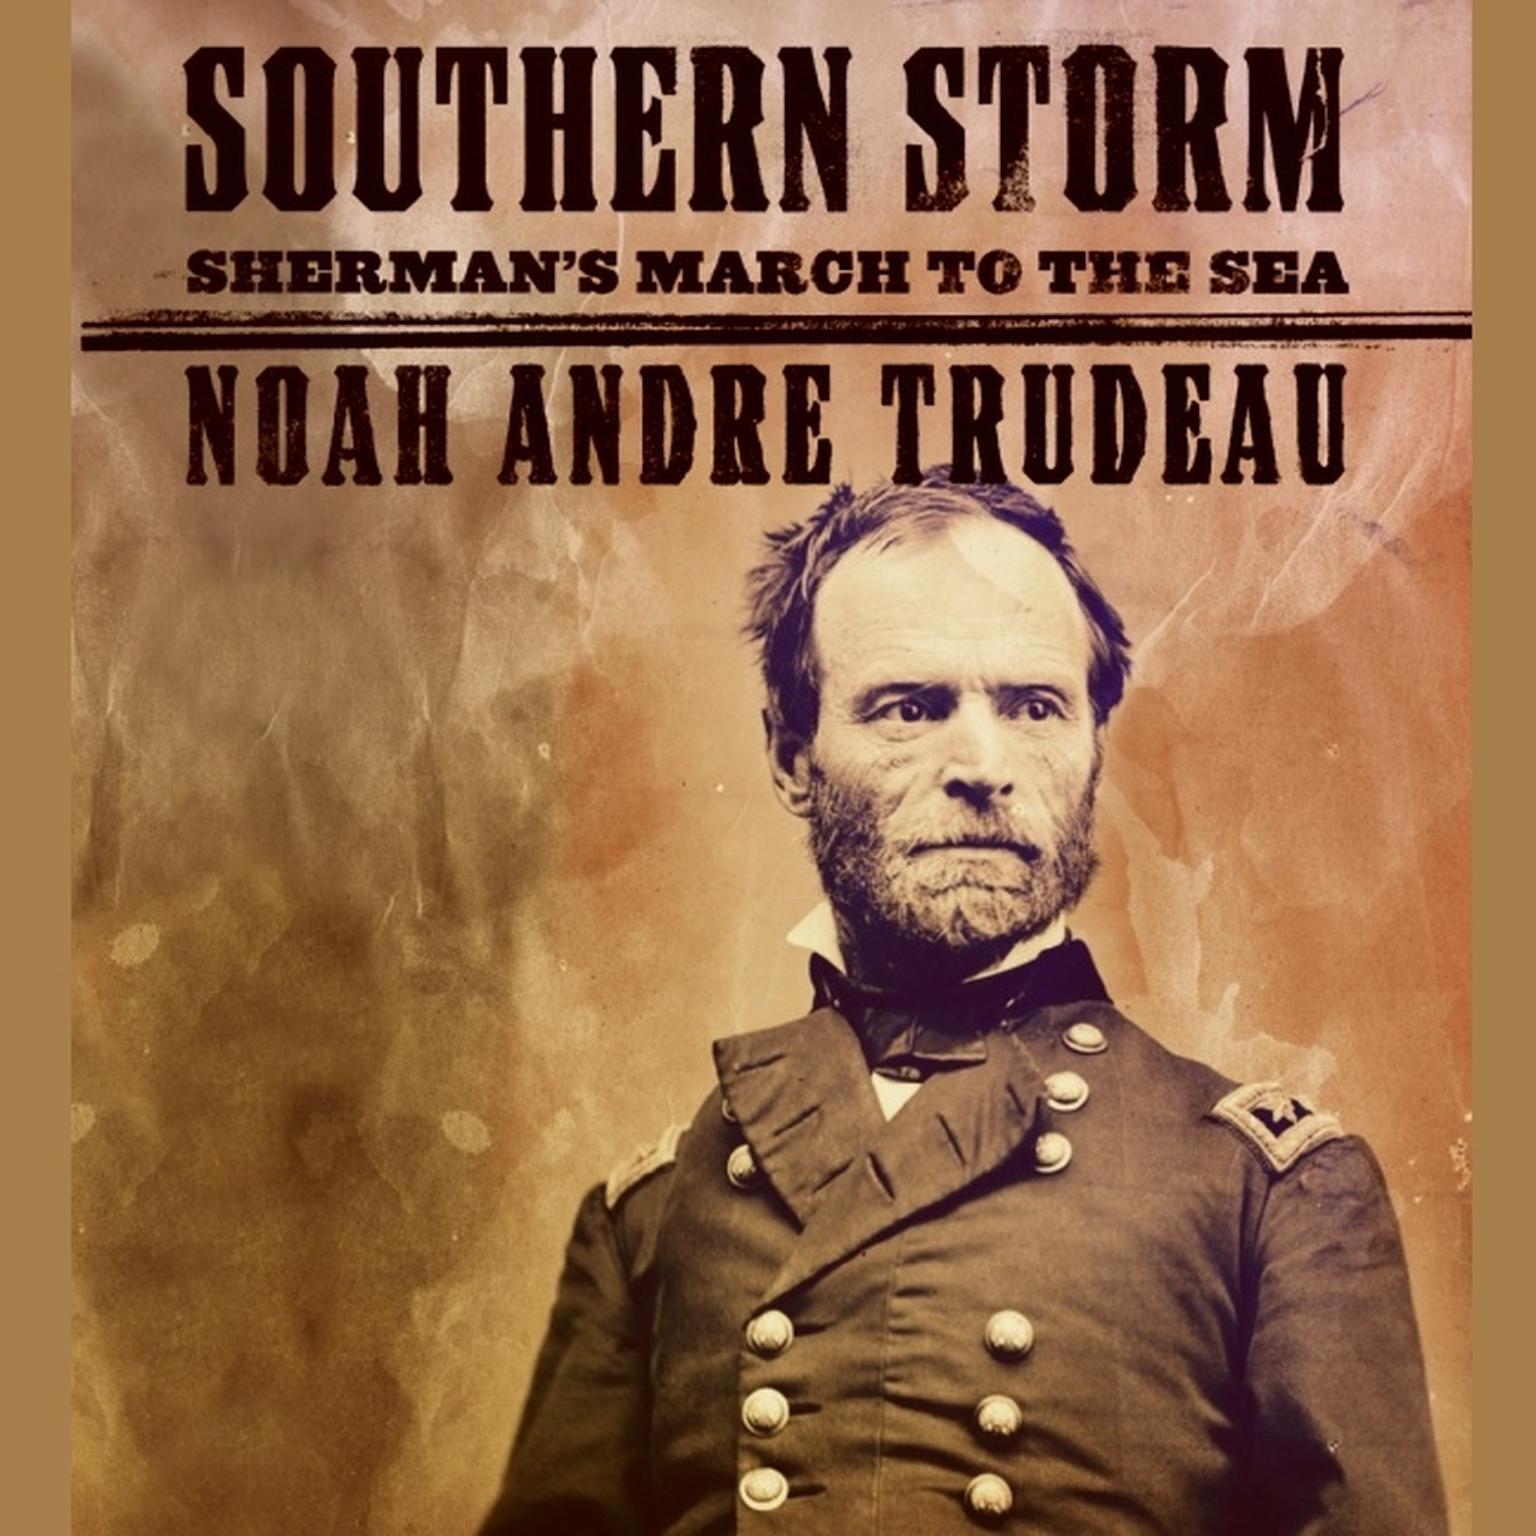 Southern Storm (Abridged): Shermans March to the Sea Audiobook, by Noah Andre Trudeau